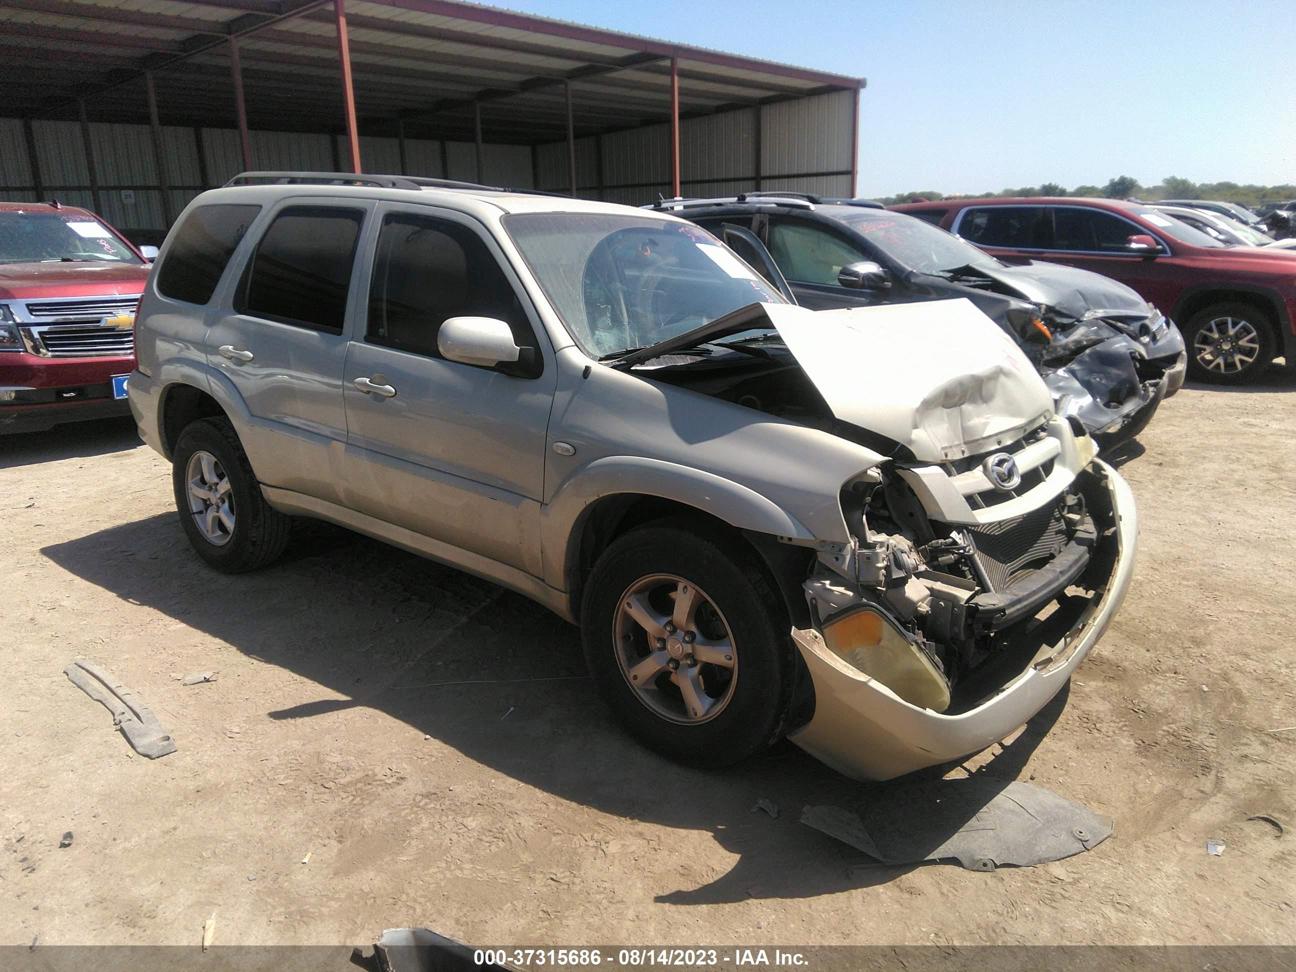 vin: 4F2YZ04196KM04004 4F2YZ04196KM04004 2006 mazda tribute 3000 for Sale in 76247, 3748 Mcpherson Dr, Justin, Texas, USA